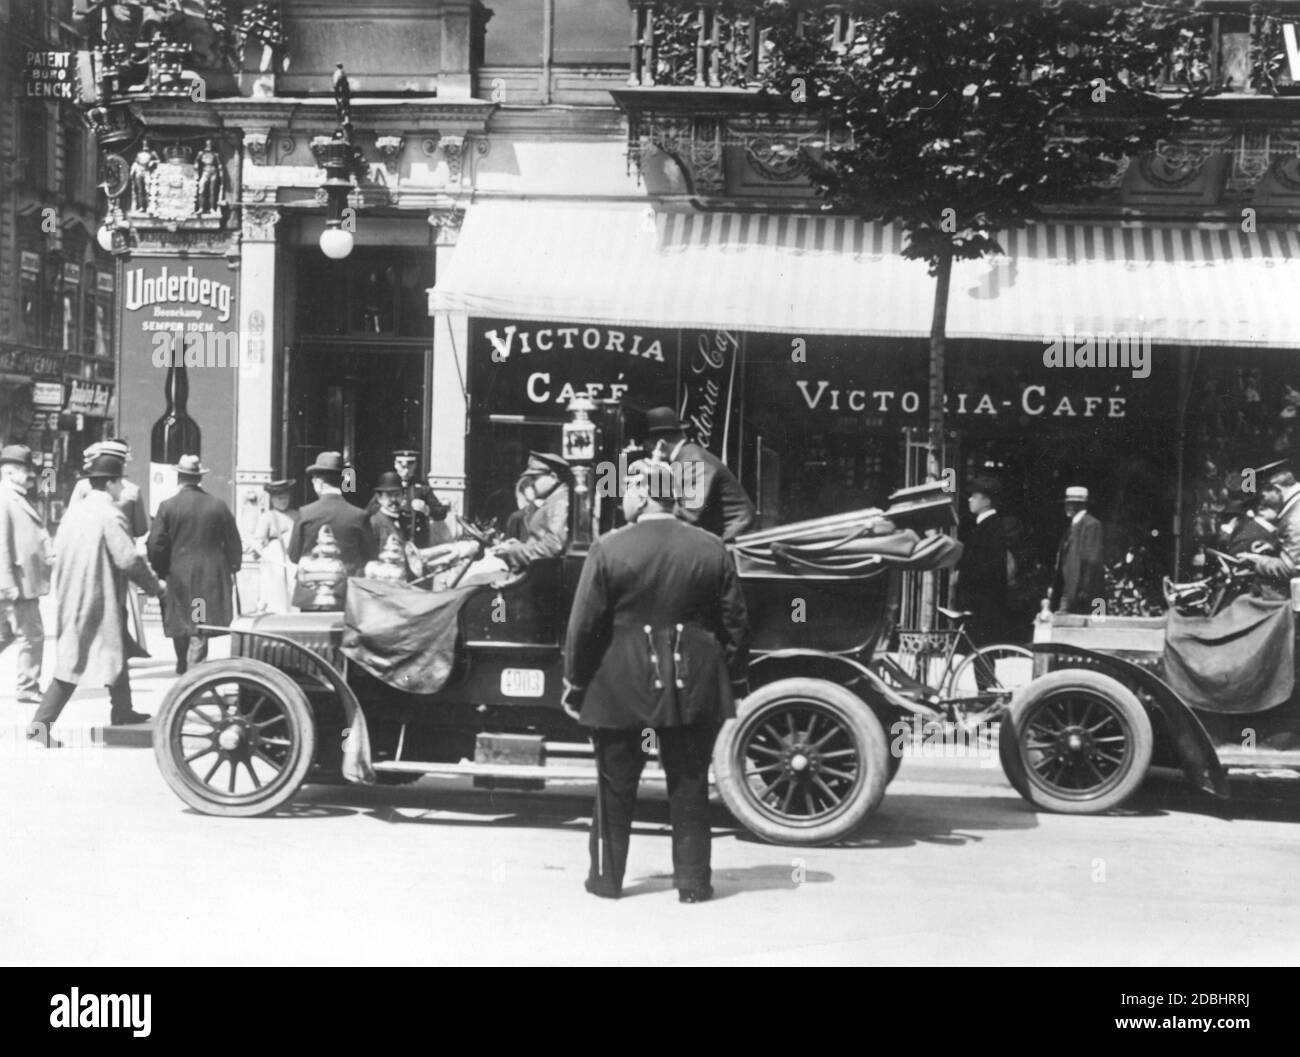 'A car stops in front of the Victoria-Cafe in the boulevard Unter den Linden, corner of Friedrichstrasse in Berlin and a passenger gets off. At the corner hangs an advertising poster for ''Underberg-Boonekamp SEMPER IDEM'' and above it a sign for ''Patentbuero Lenck''. The picture was taken around 1920.' Stock Photo